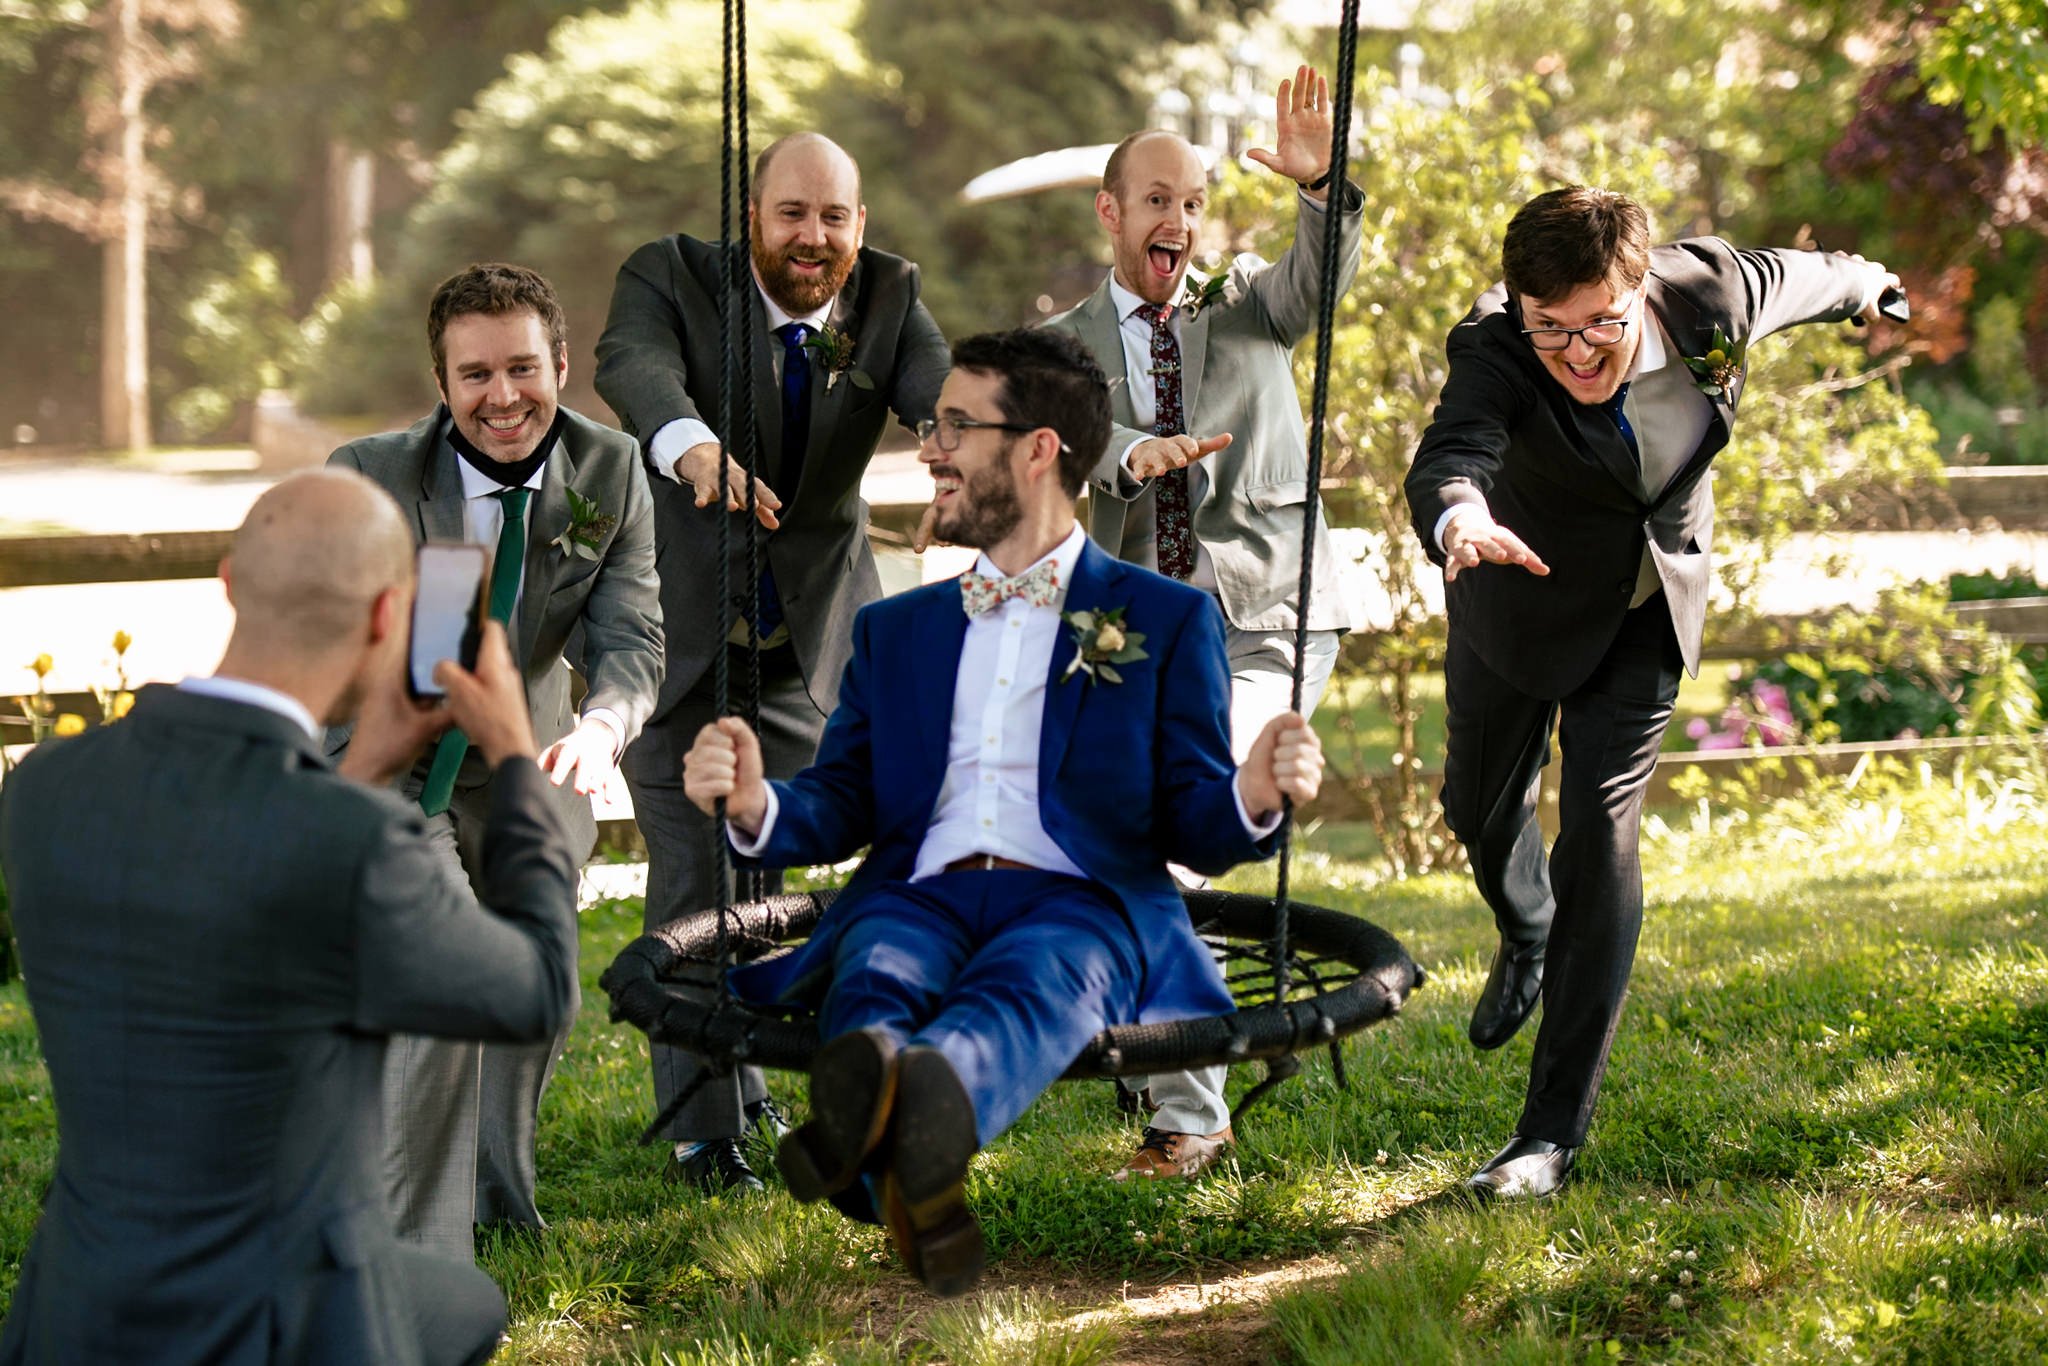 A group of groomsmen, including the best man, on a swing.